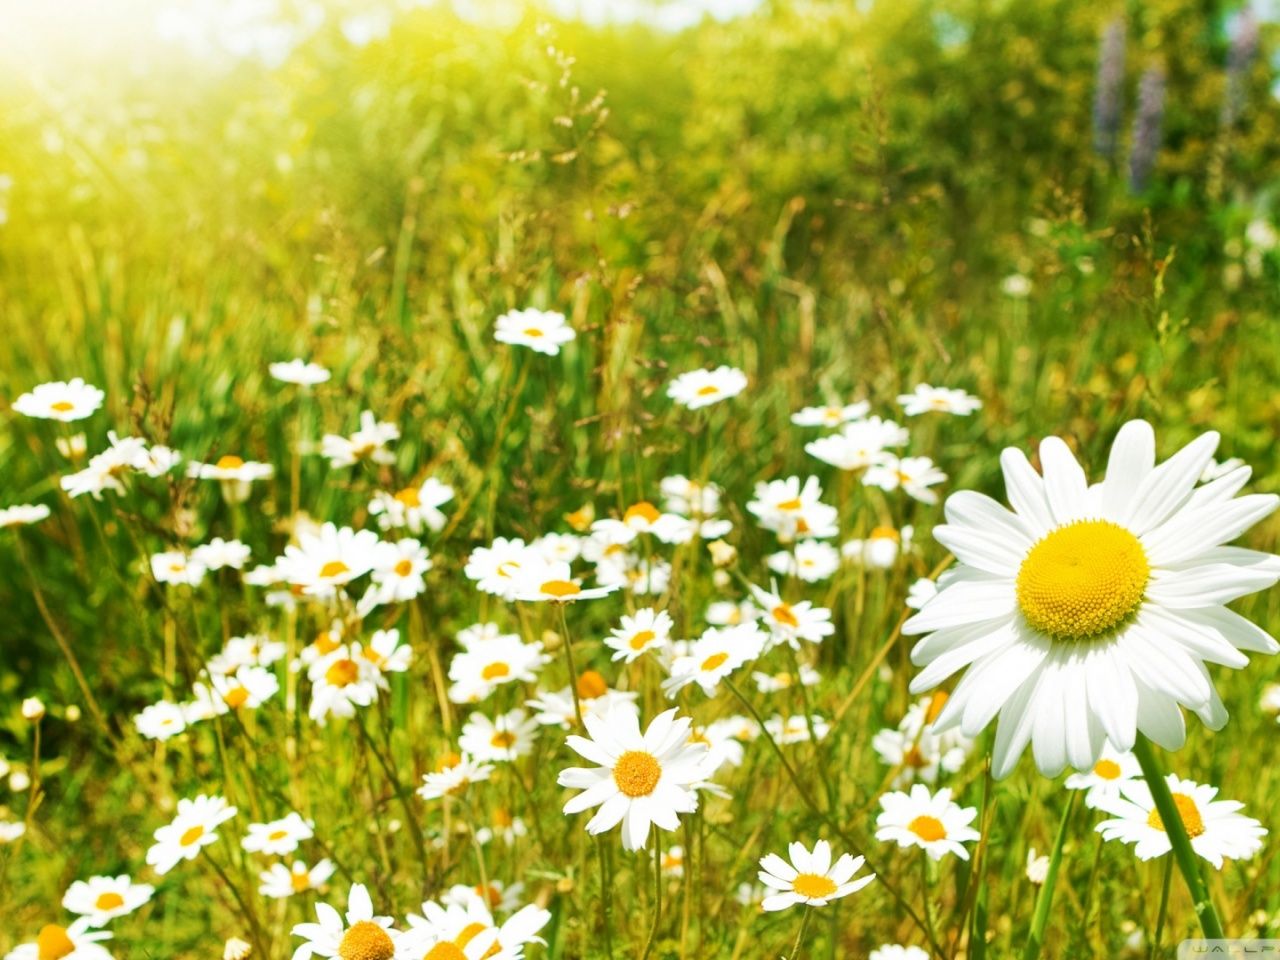 daisies sunny field uhd 4k wallpaper pixelz.cc on field of daisies wallpapers